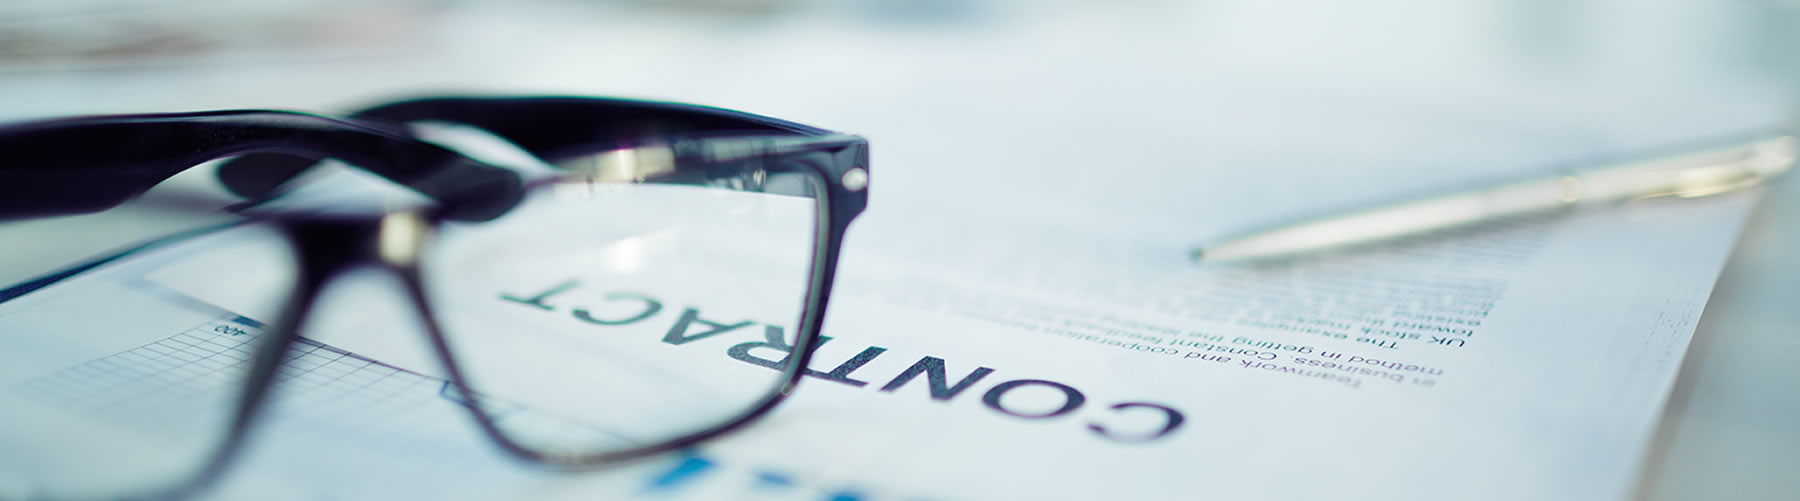 business documents with glasses on the table